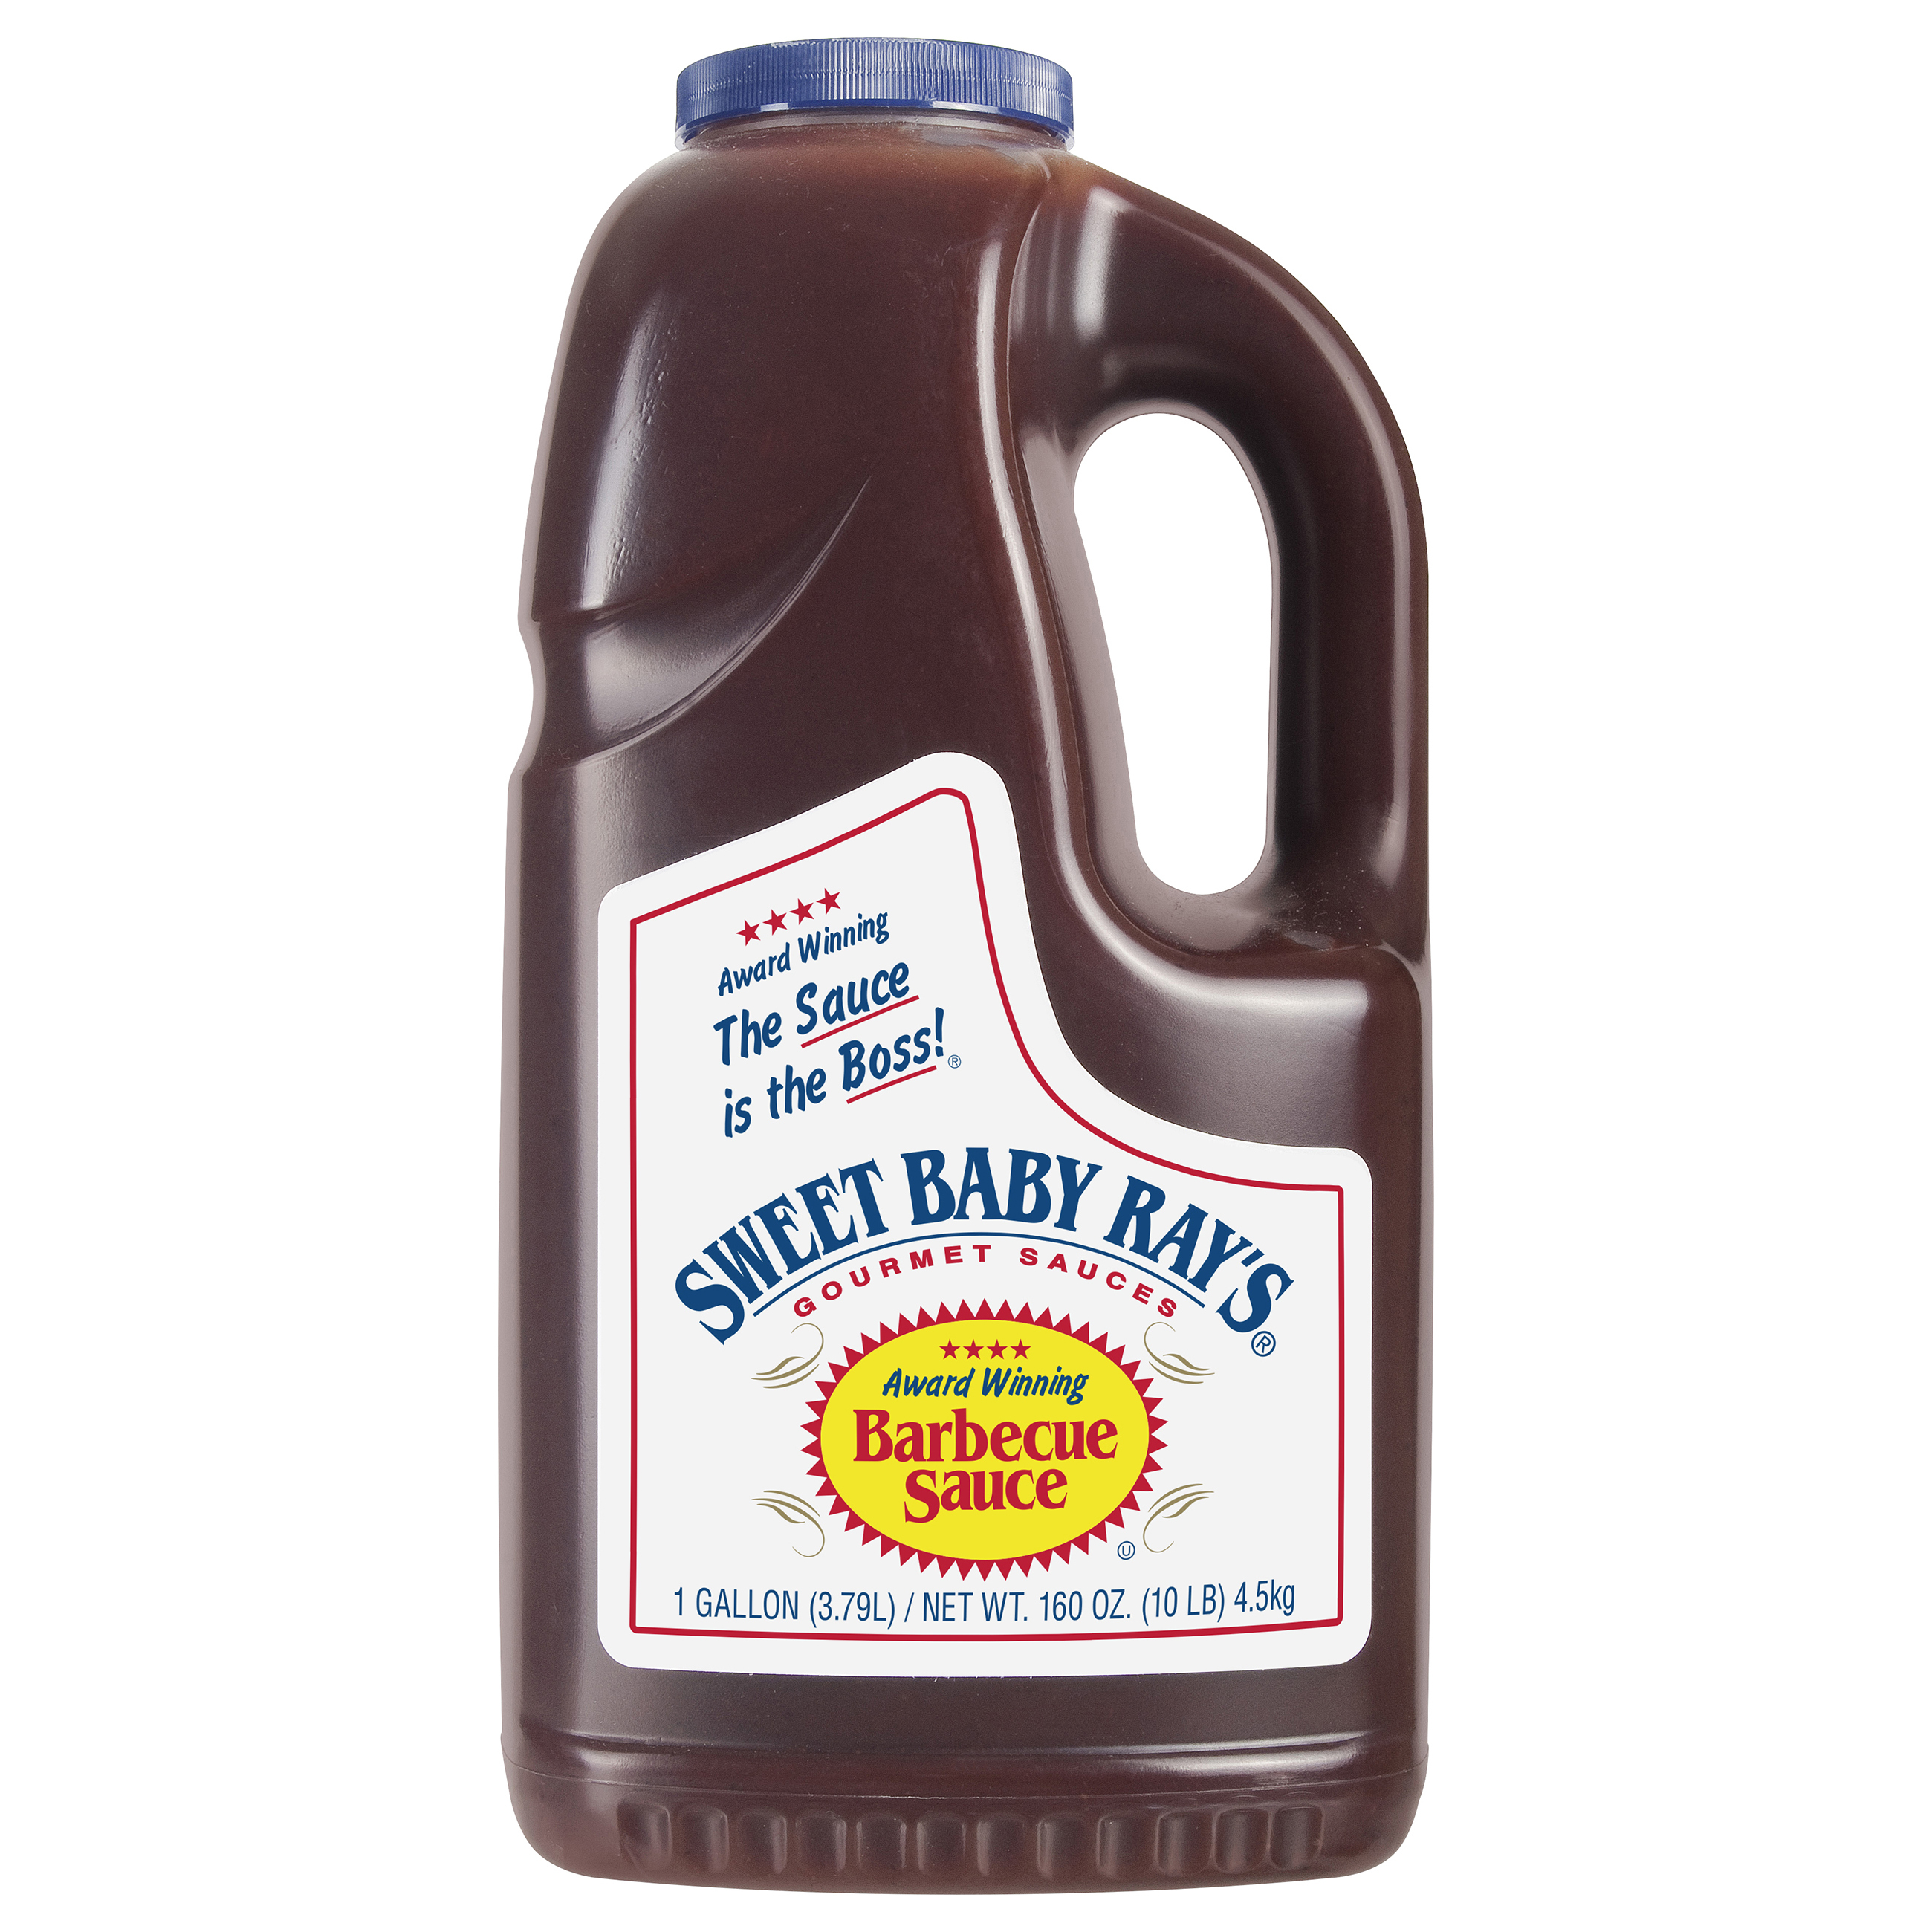 Sweet Baby Ray's Original Barbecue Sauce 1 gal - image 3 of 4